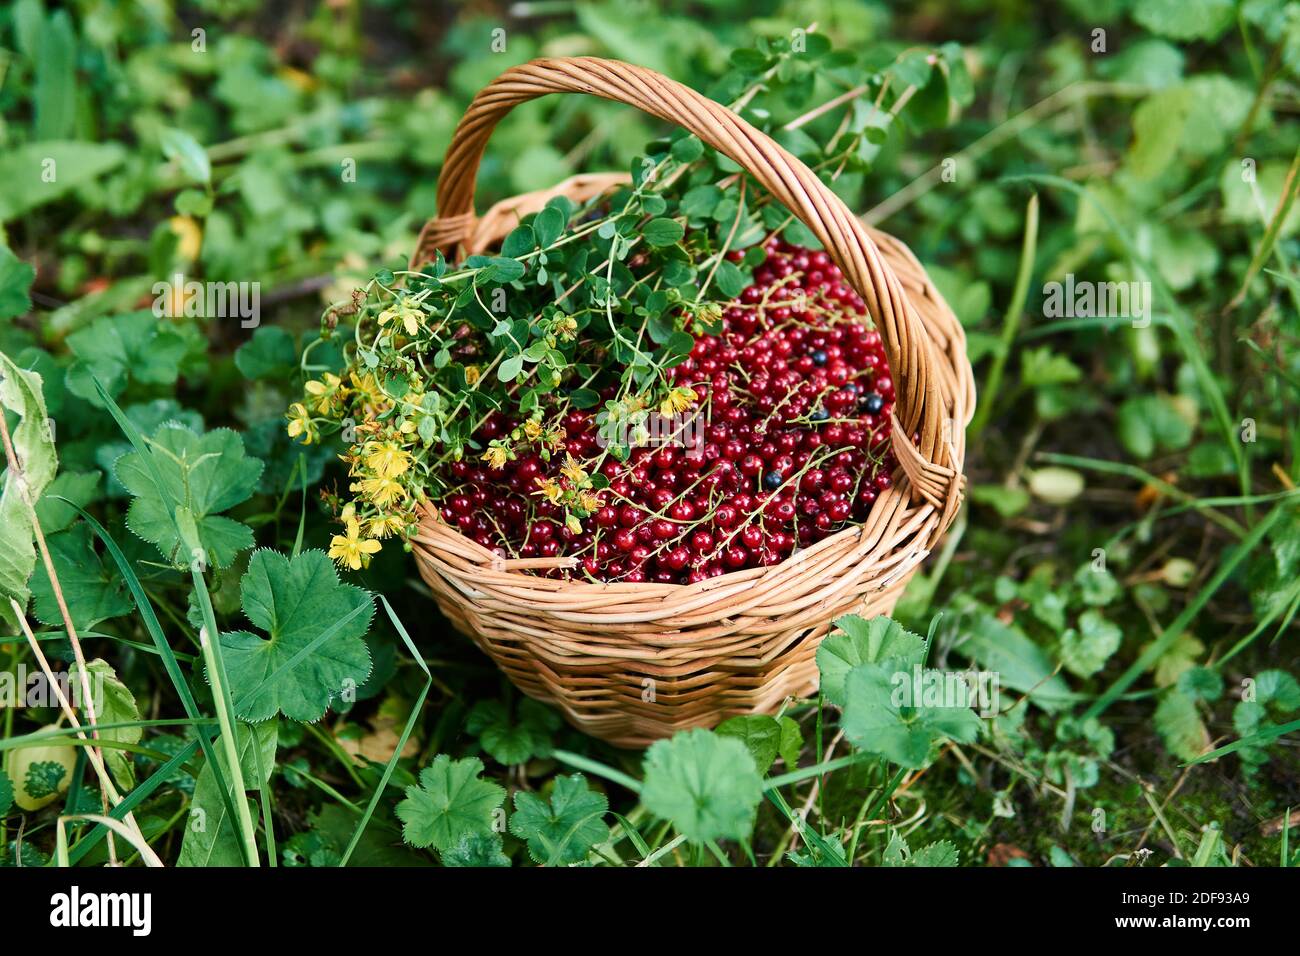 wicker basket full of red currant berries and a bunch of St. John's wort flowers stand in the grass Stock Photo